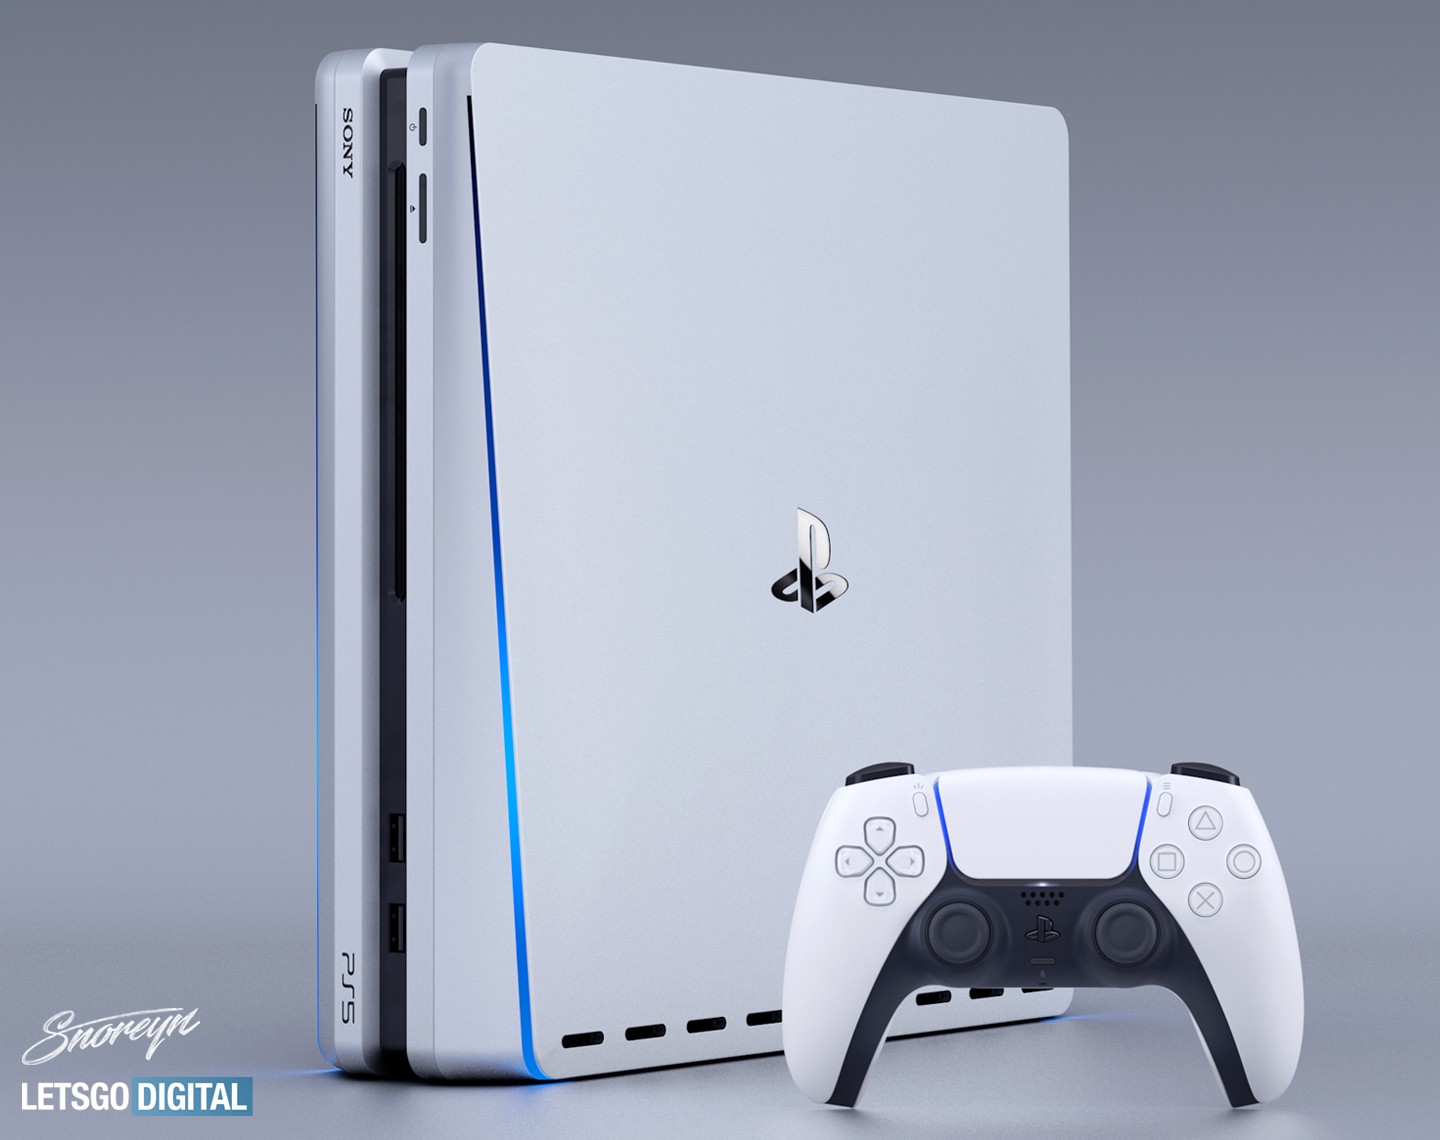 This 5 concept design from Snoreyn so convincing it could be mistaken for the real PS5 - NotebookCheck.net News